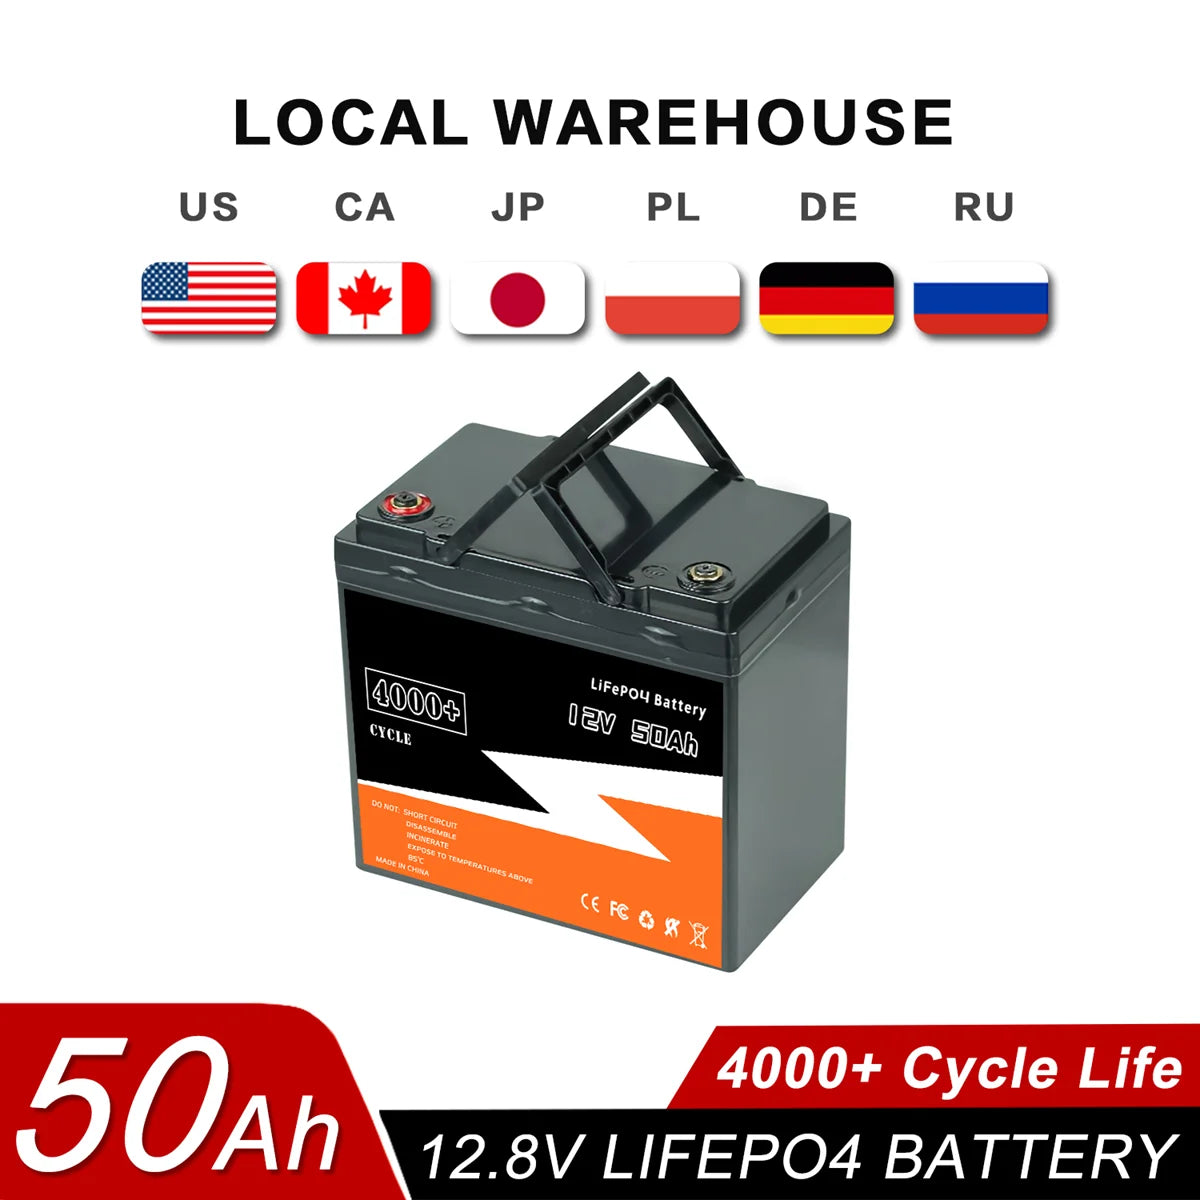 New 12V 50Ah 40Ah LiFePO4 Battery, High-performance lithium-ion battery with 50Ah capacity, long cycle life, and built-in safety features.